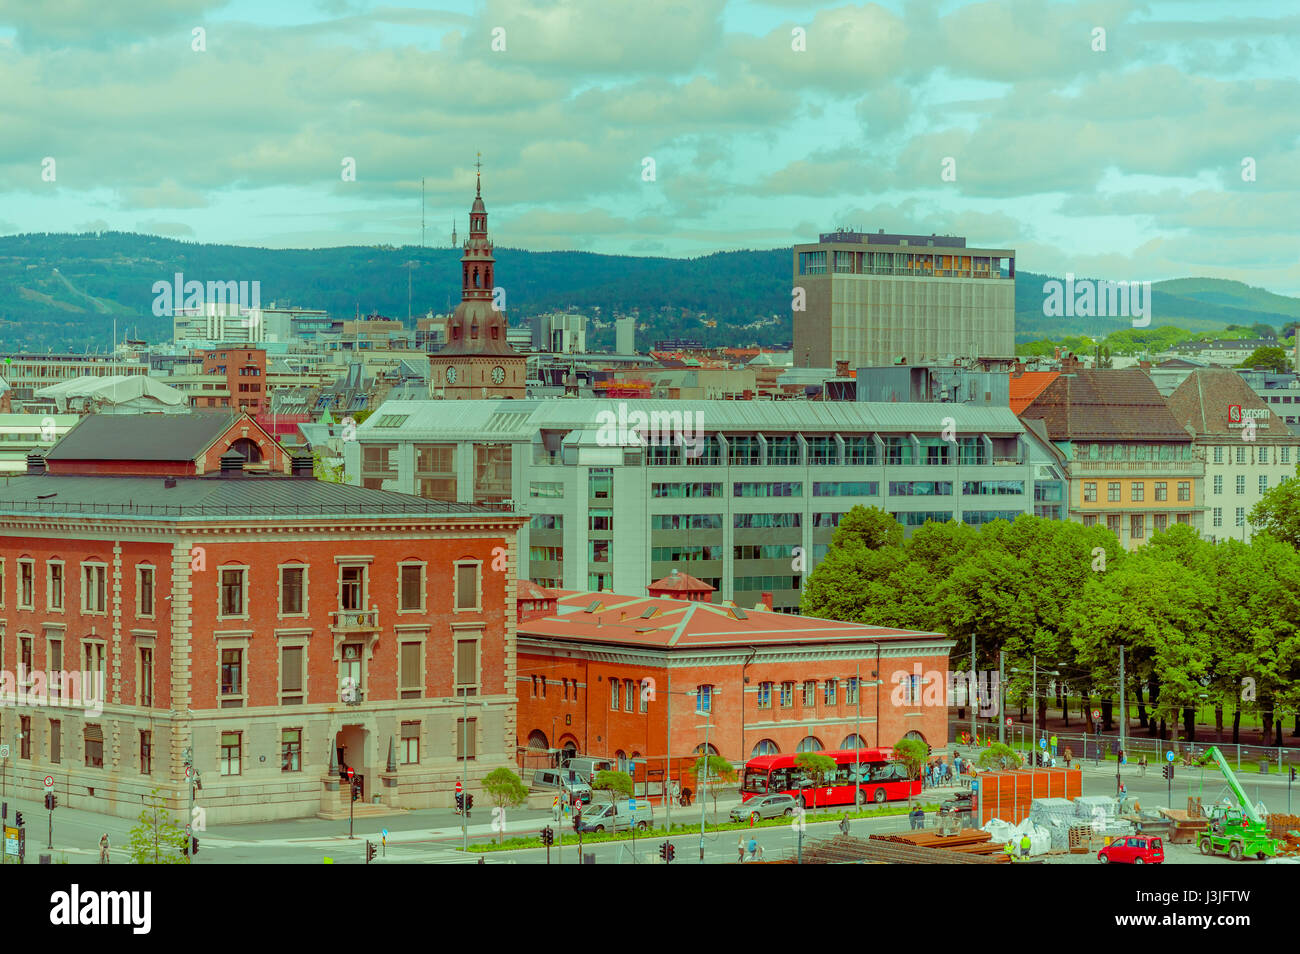 OSLO, NORWAY - 8 JULY, 2015: Great view from roof of opera building showing city rooftops and green hillsides in distance. Stock Photo